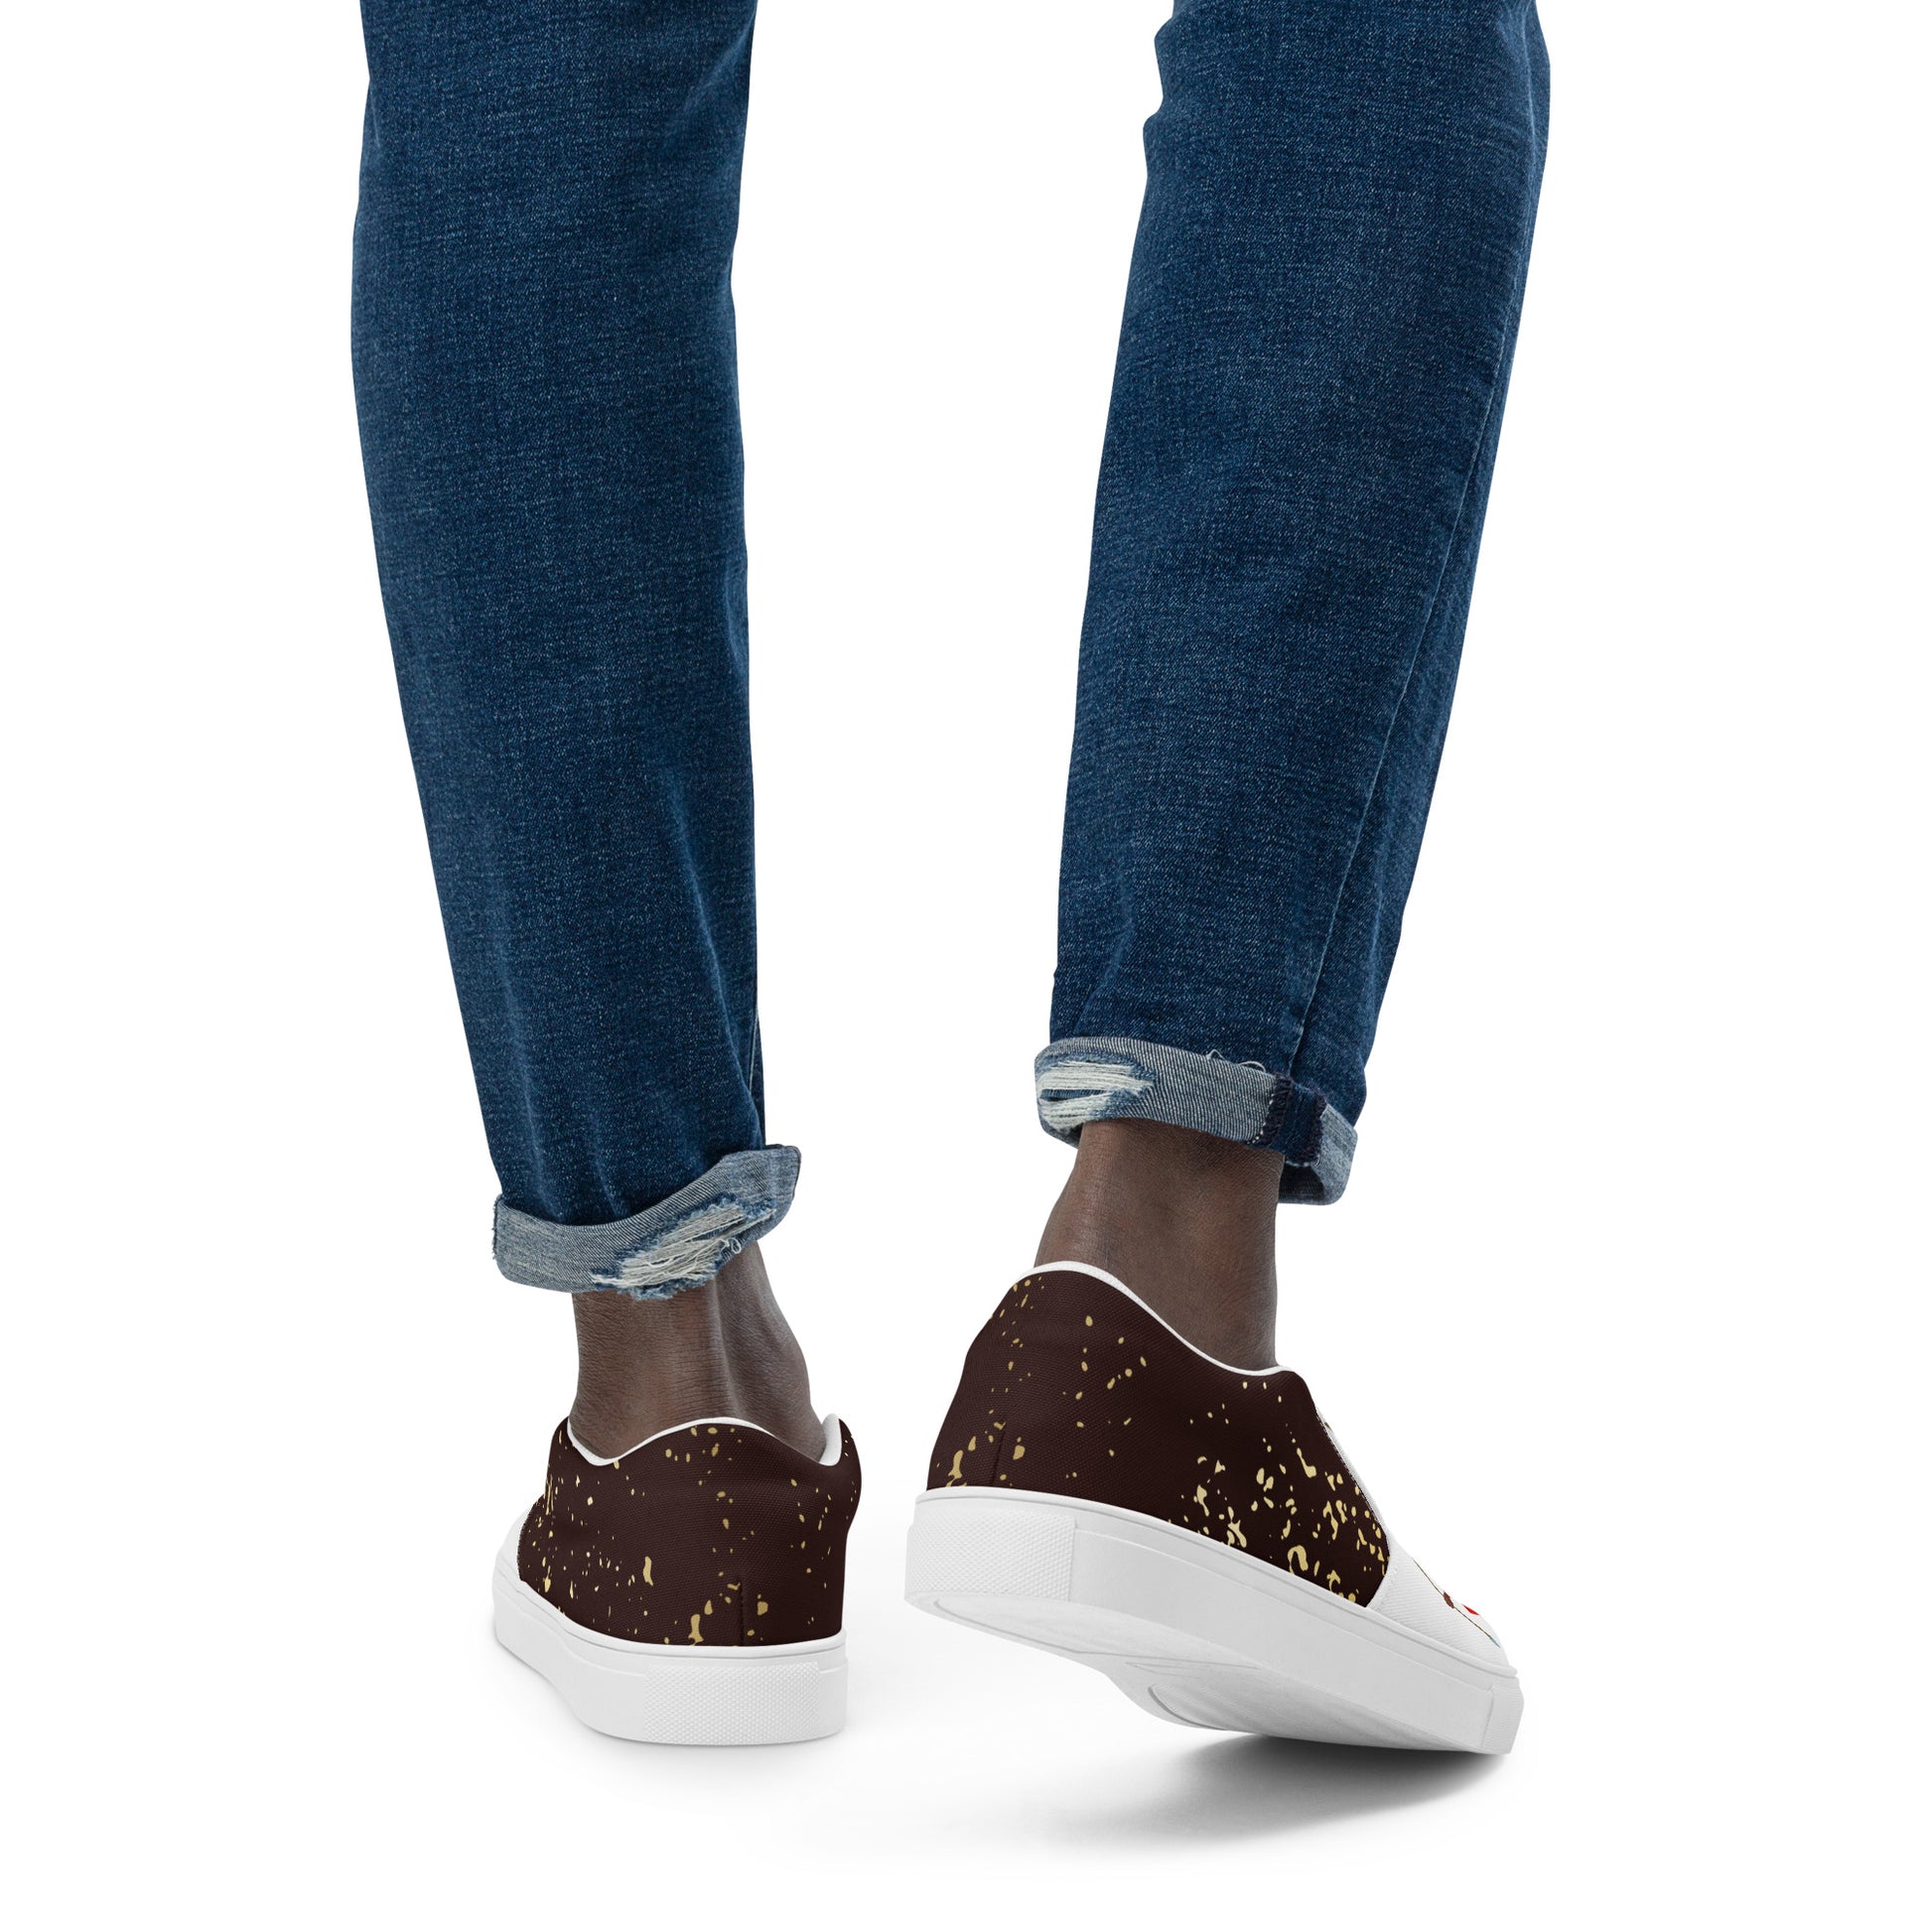 Agojie Chocolate Men’s Slip-On Canvas Shoes